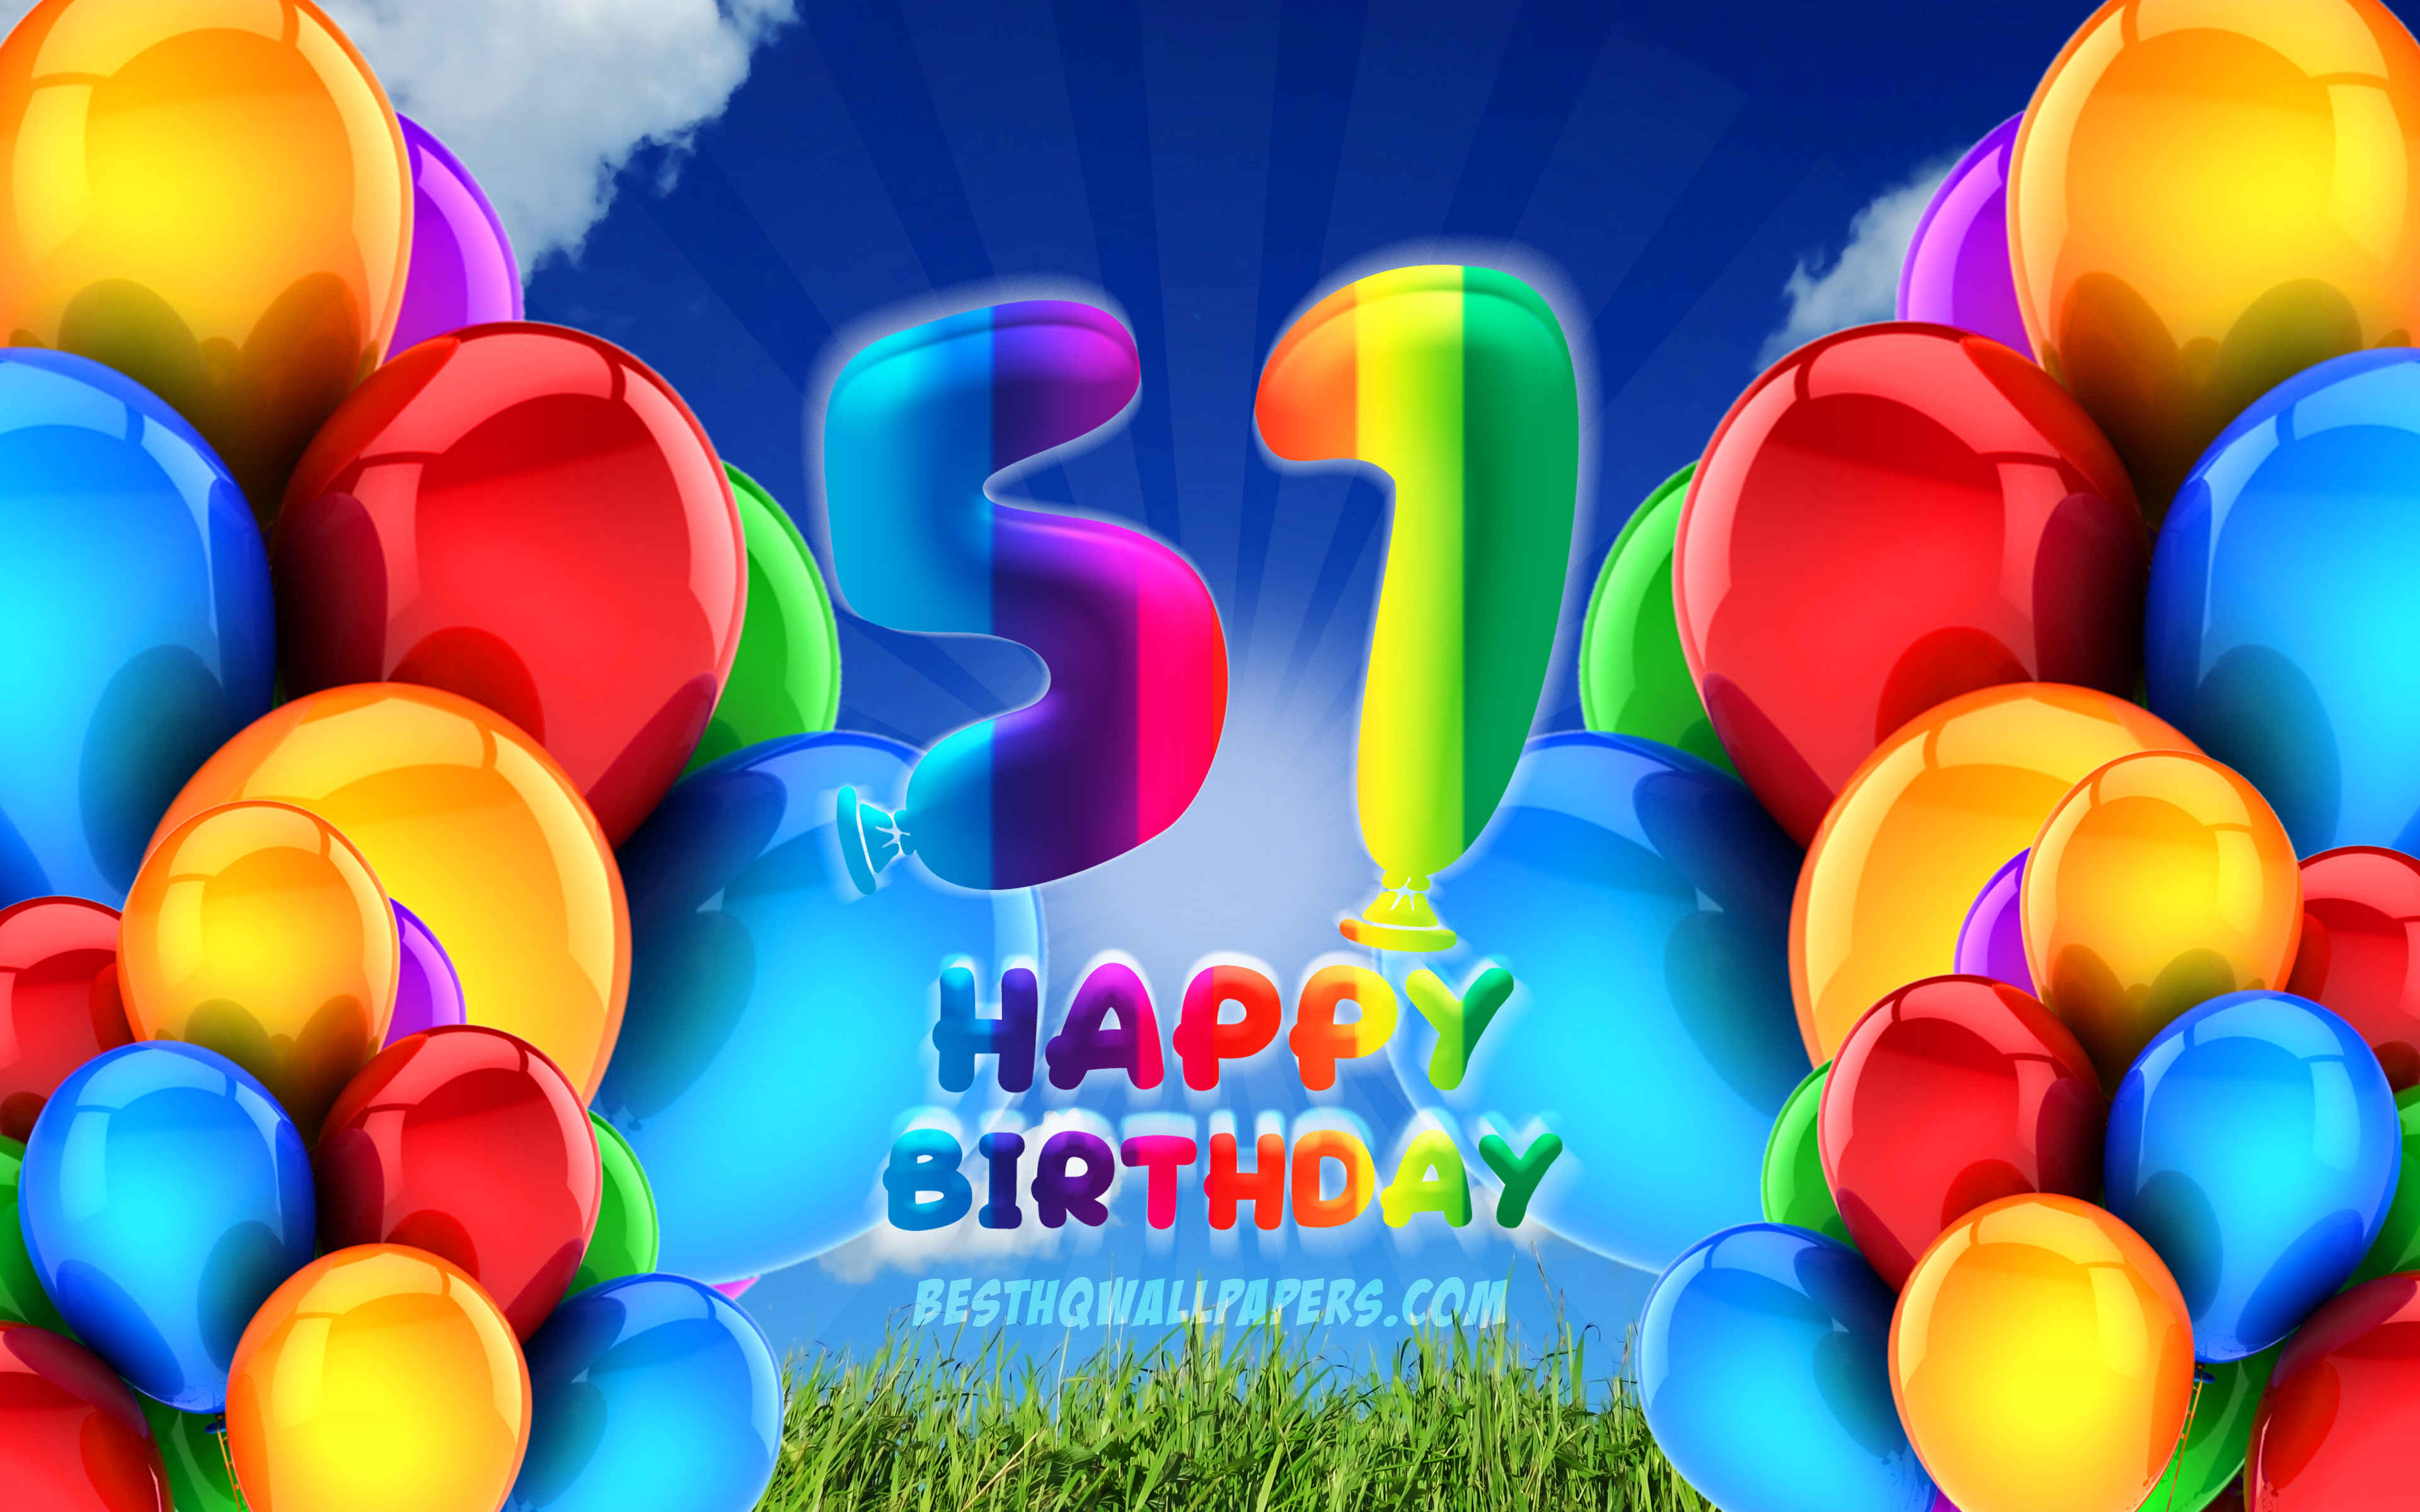 Download wallpapers 4k, Happy 51 Years Birthday, cloudy sky background,  Birthday Party, colorful ballons, Happy 51st birthday, artwork, 51st  Birthday, Birthday concept, 51st Birthday Party for desktop with resolution  3840x2400. High Quality